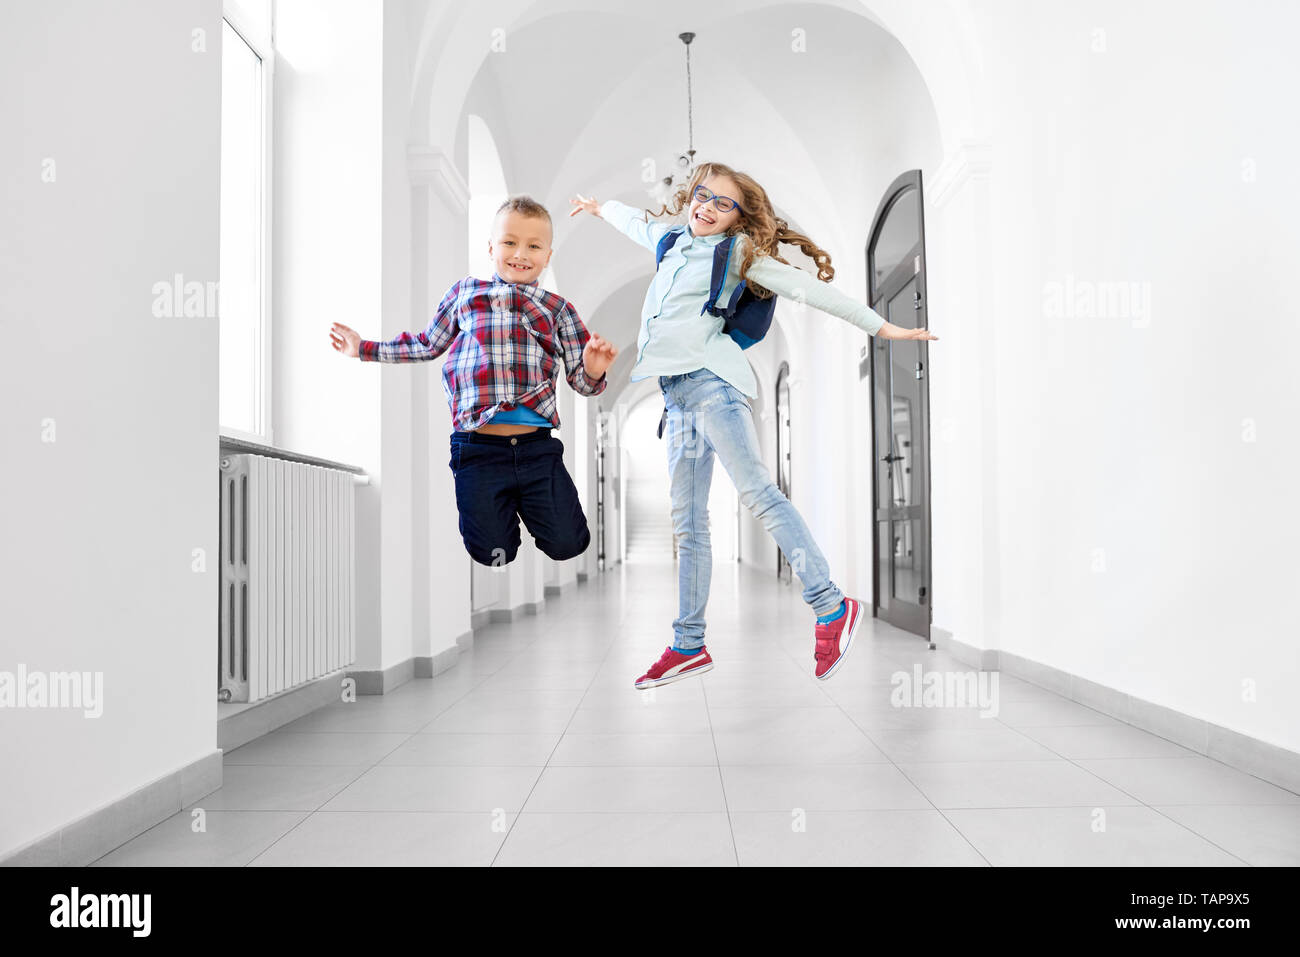 Happy, cheerful schoolchildren having fun after lessons in school hallway. Pretty, positive girl with school backpack and handsome boy smiling and jumping. Stock Photo